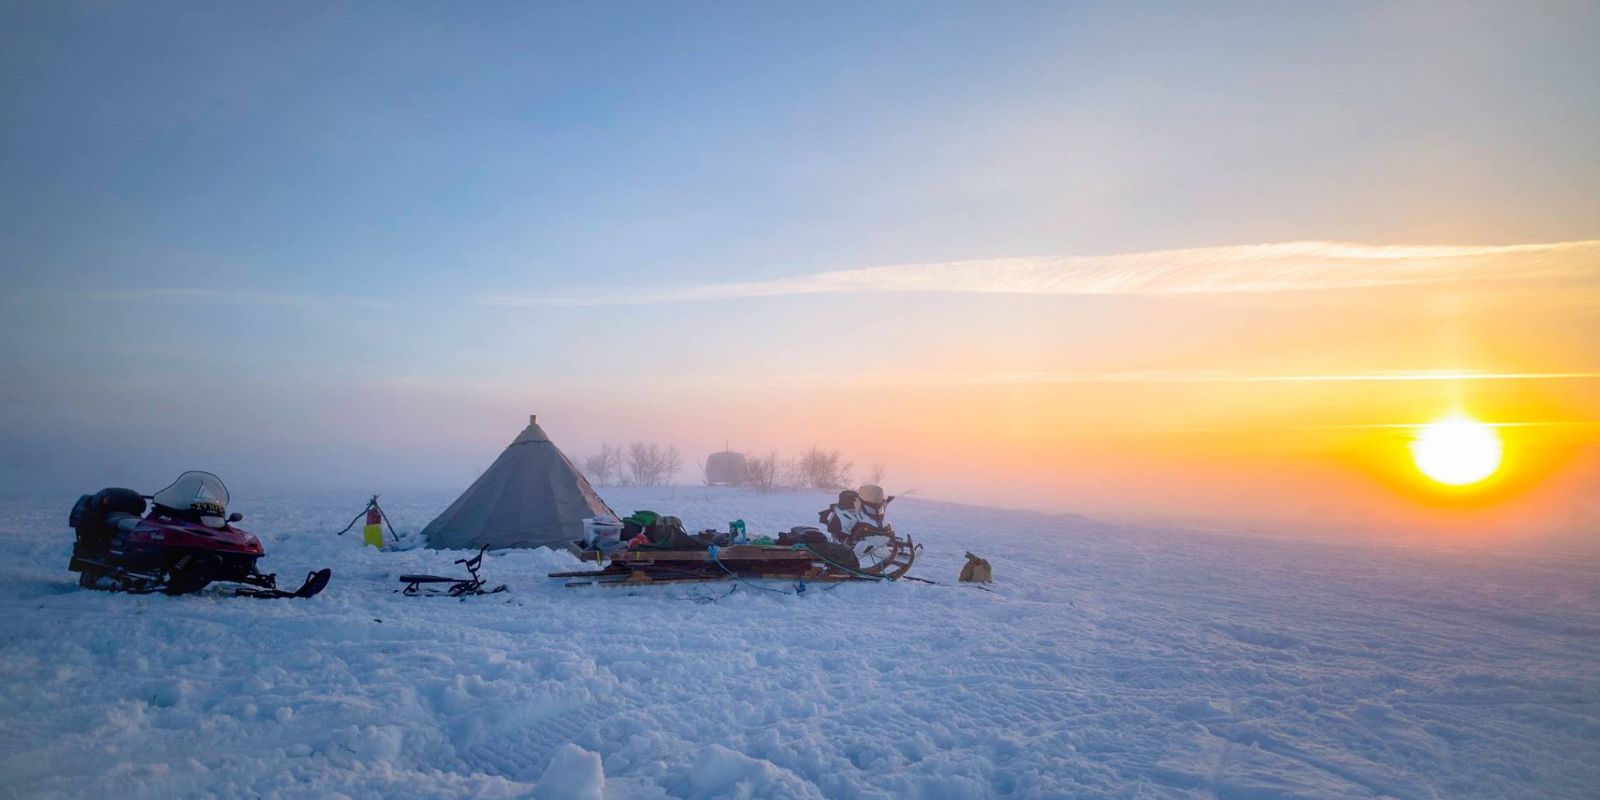 a group of people are camping in the snow with a tent in the background